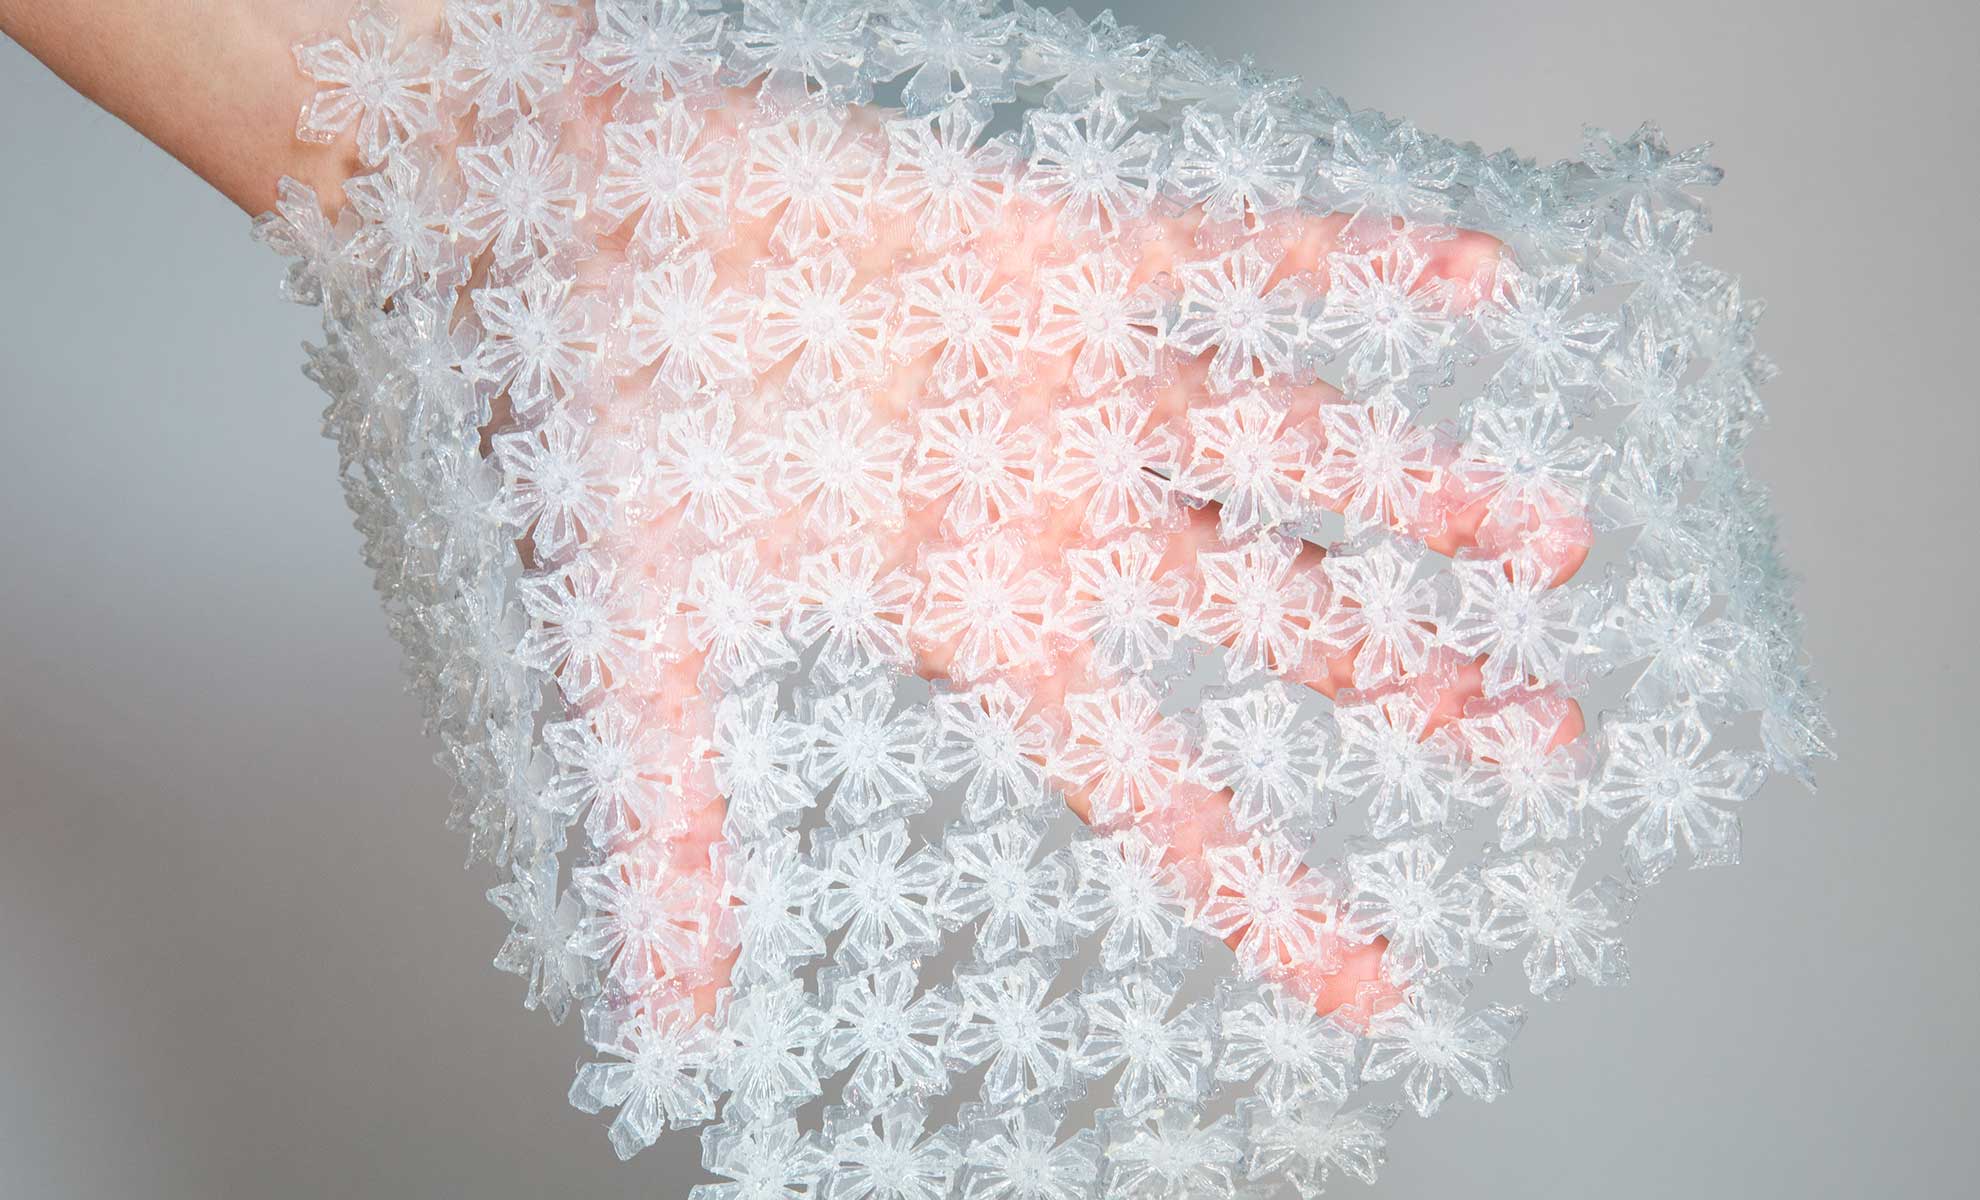 3D printing of silicone flowers in transparency